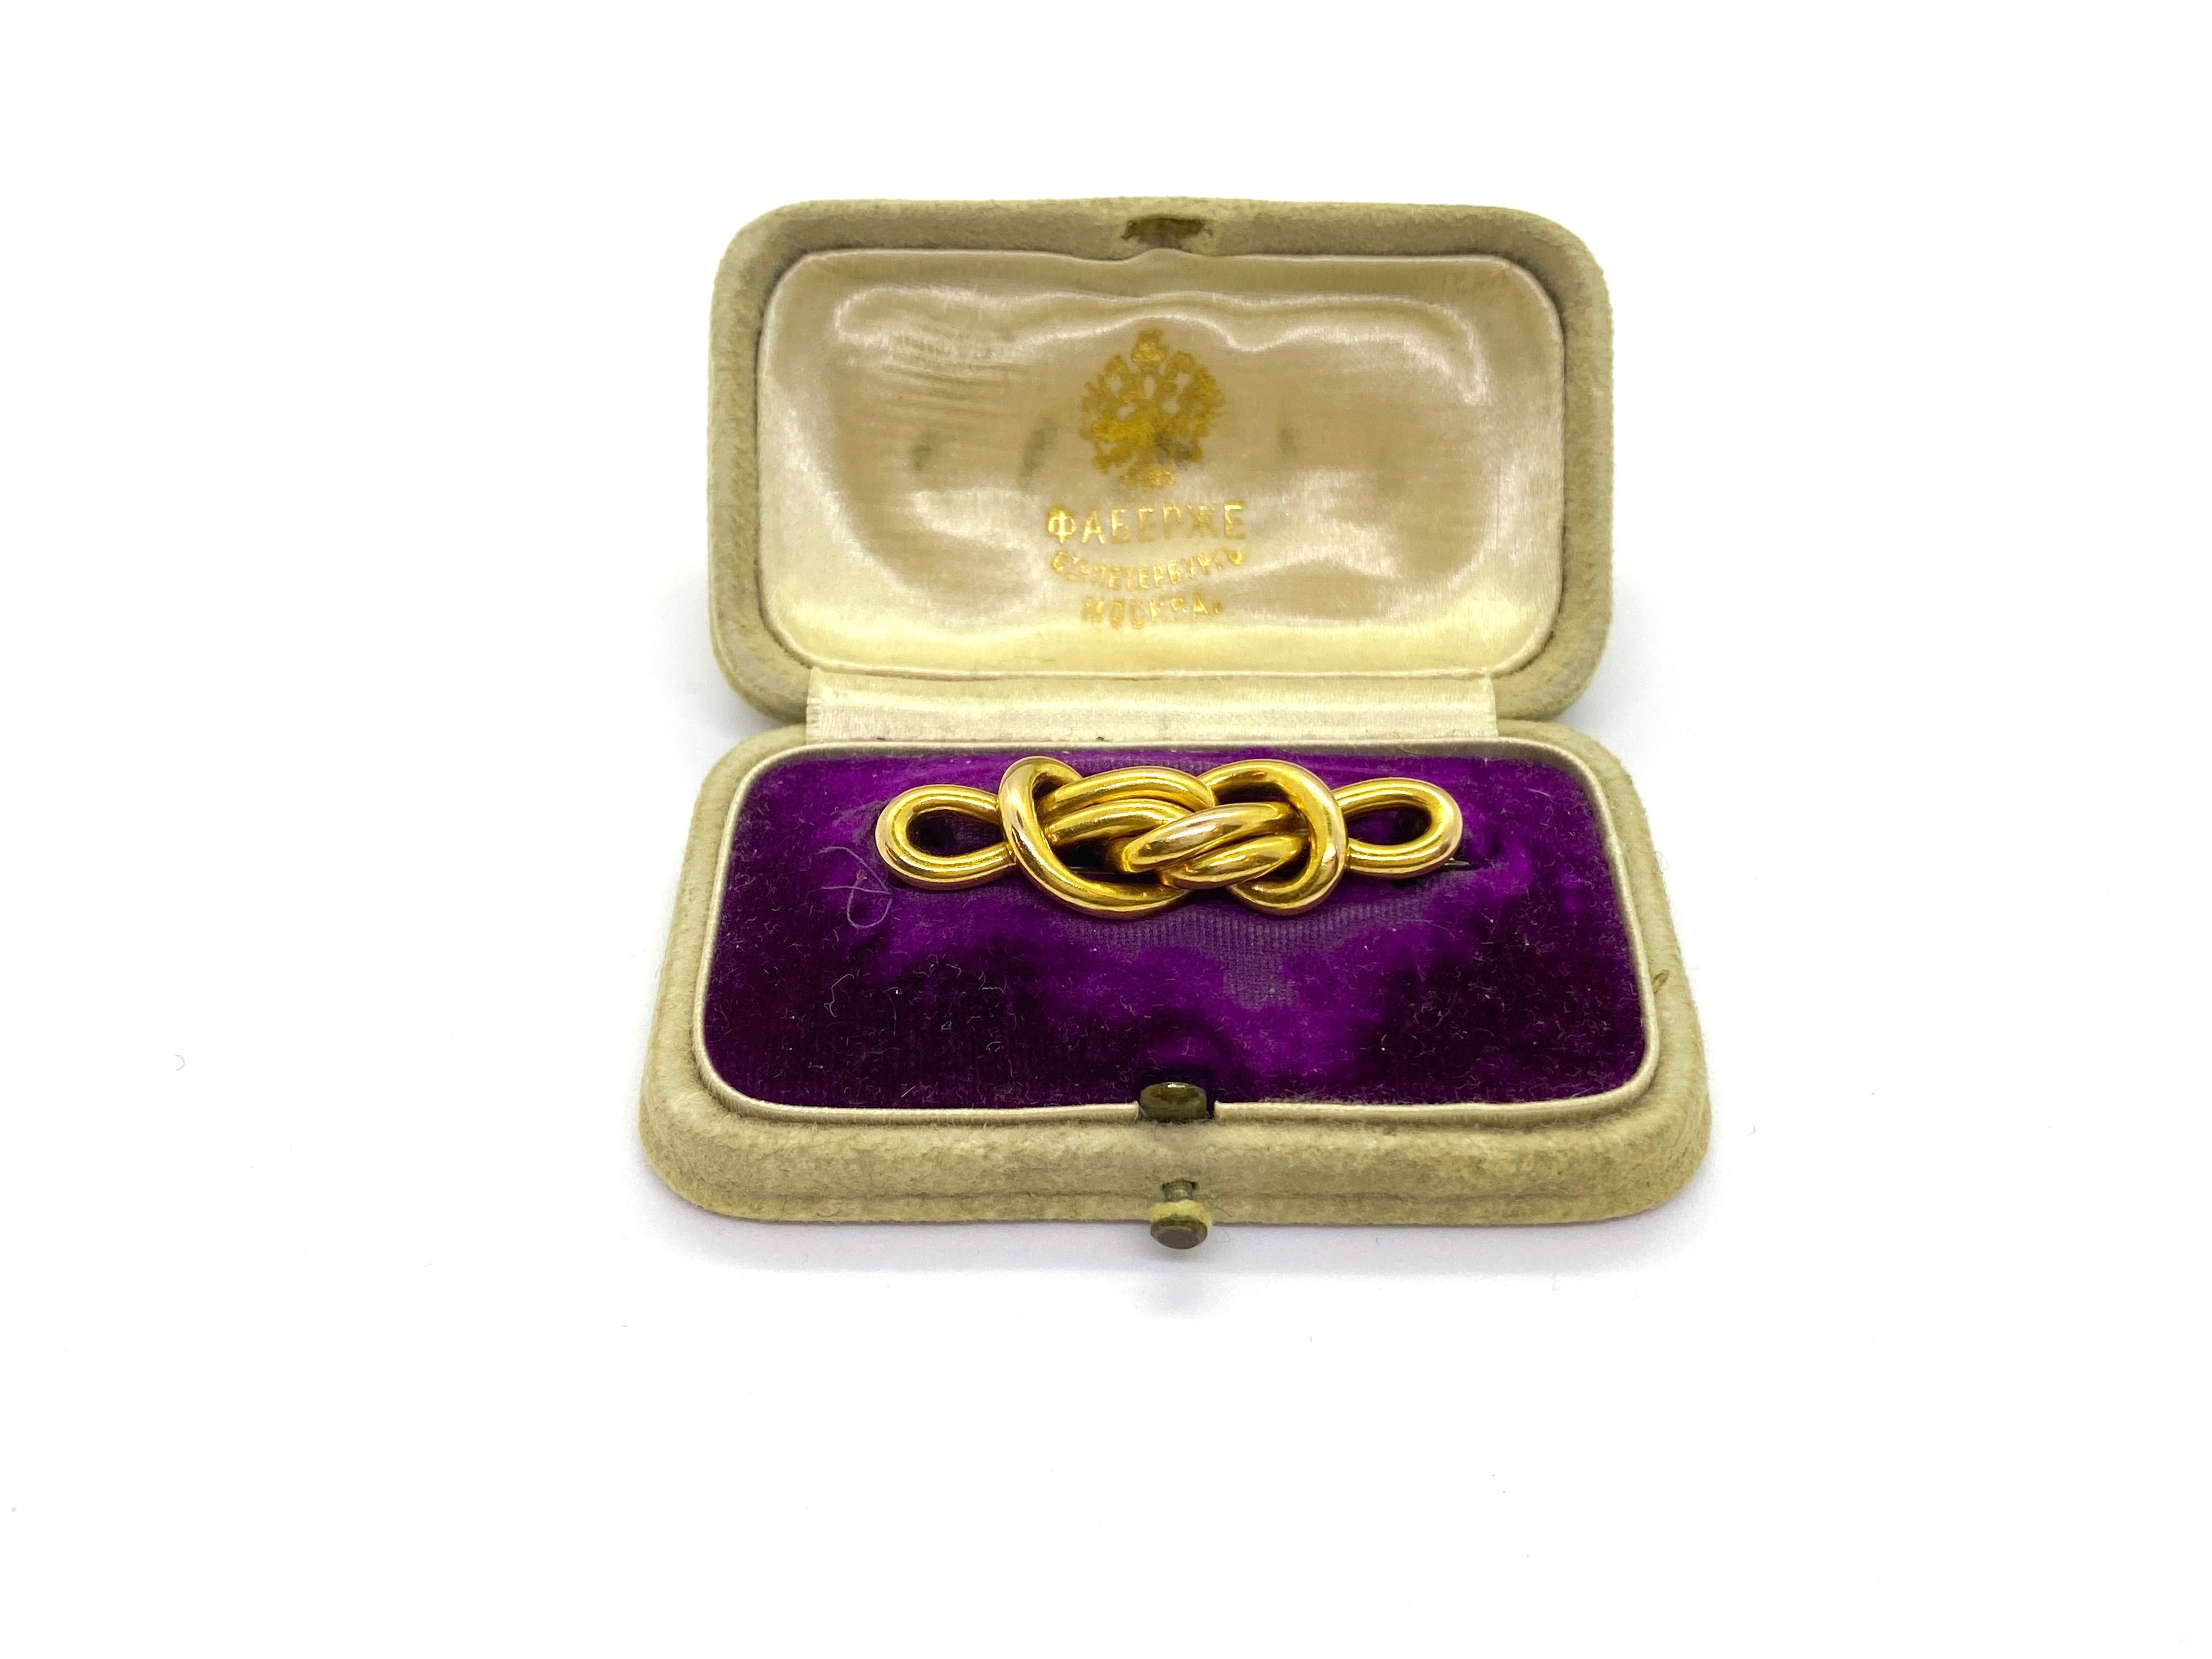 Faberge
14 Carat Yellow Gold Mikhail Perchin Fabergé Knot Brooch
14k, Russian Gold Stamp 56, Master Mikhail Perchin stamp in cyrillic letters
Year circa 1890
Original box, golden stamp inside Fabergé St Petersburg Moscow in cyrillic